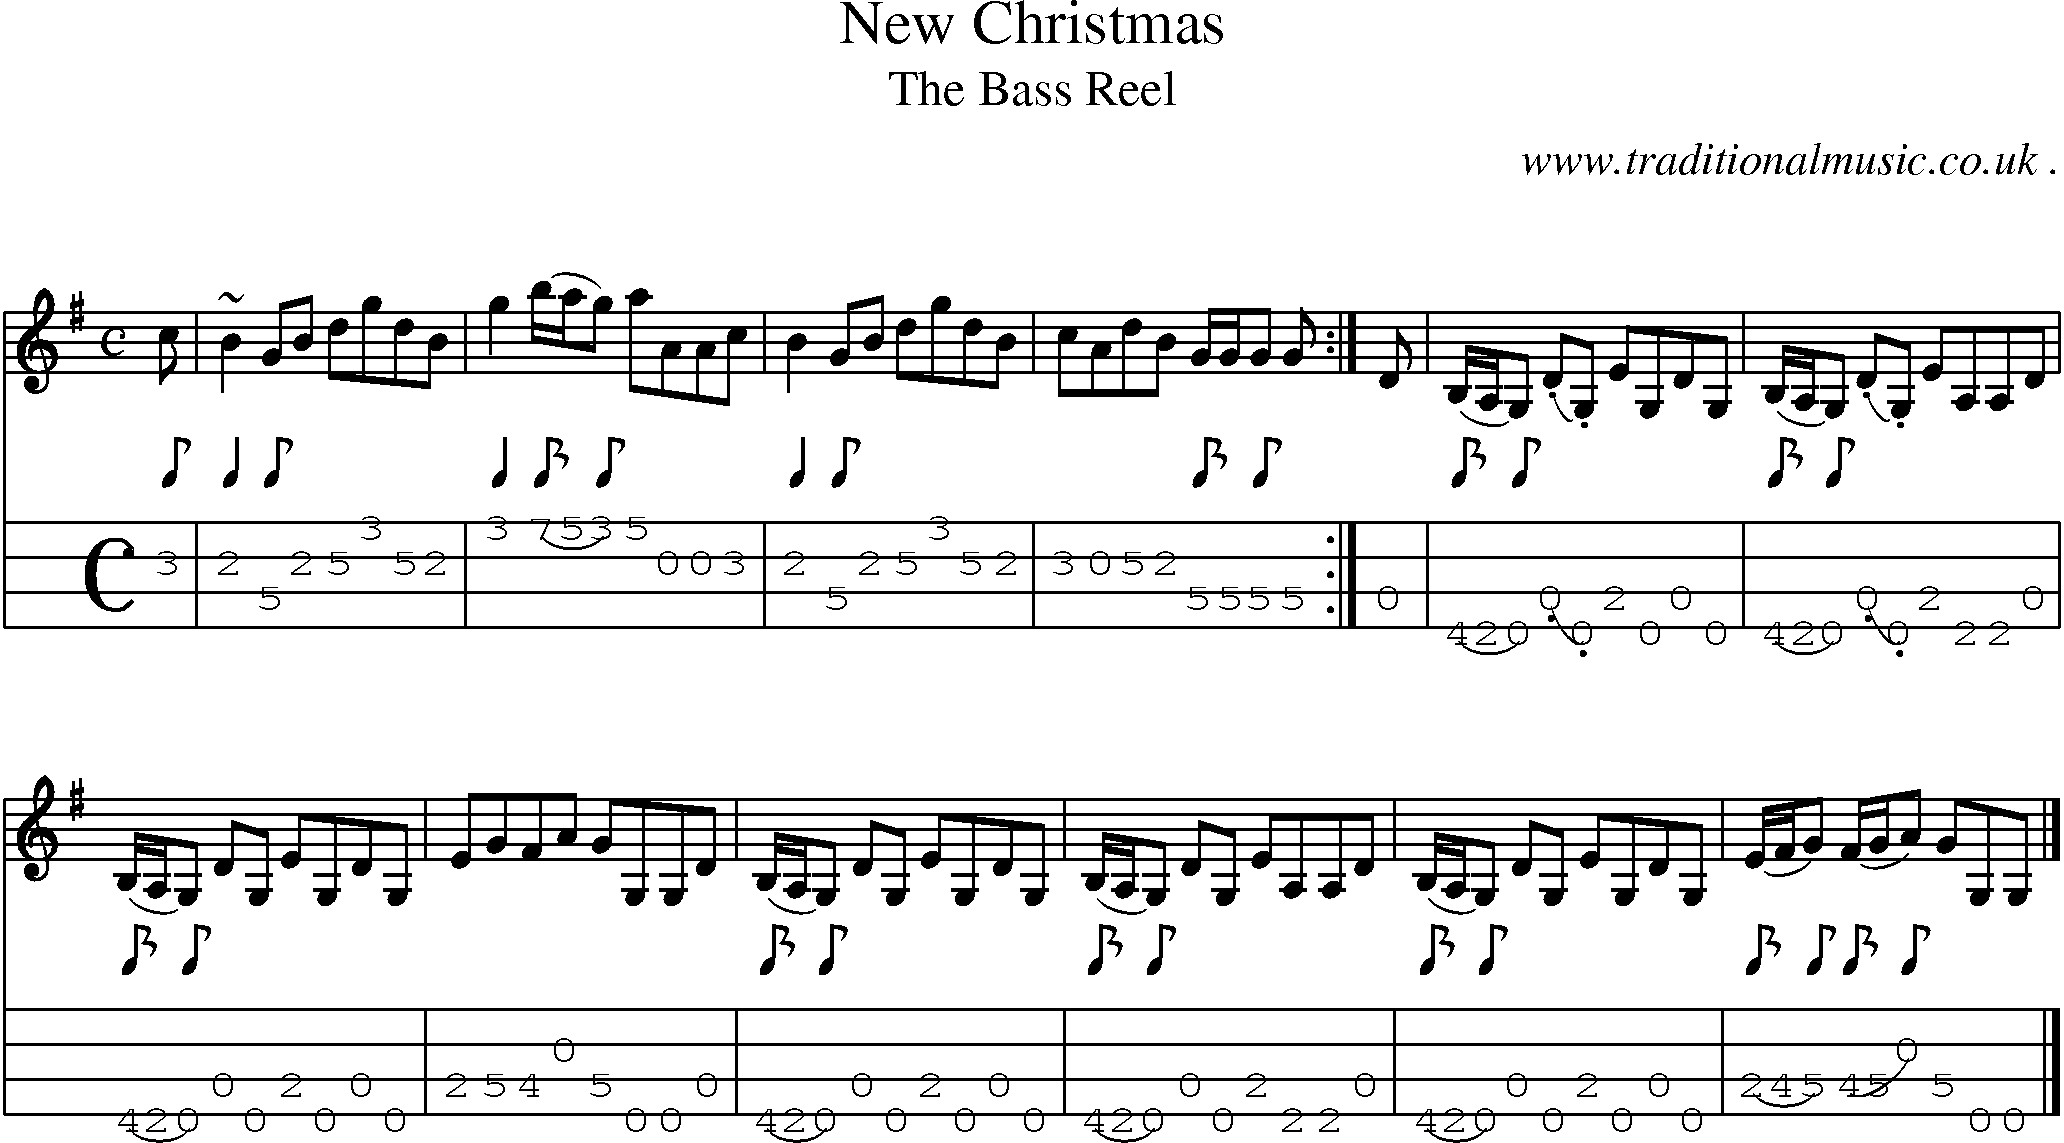 Sheet-music  score, Chords and Mandolin Tabs for New Christmas